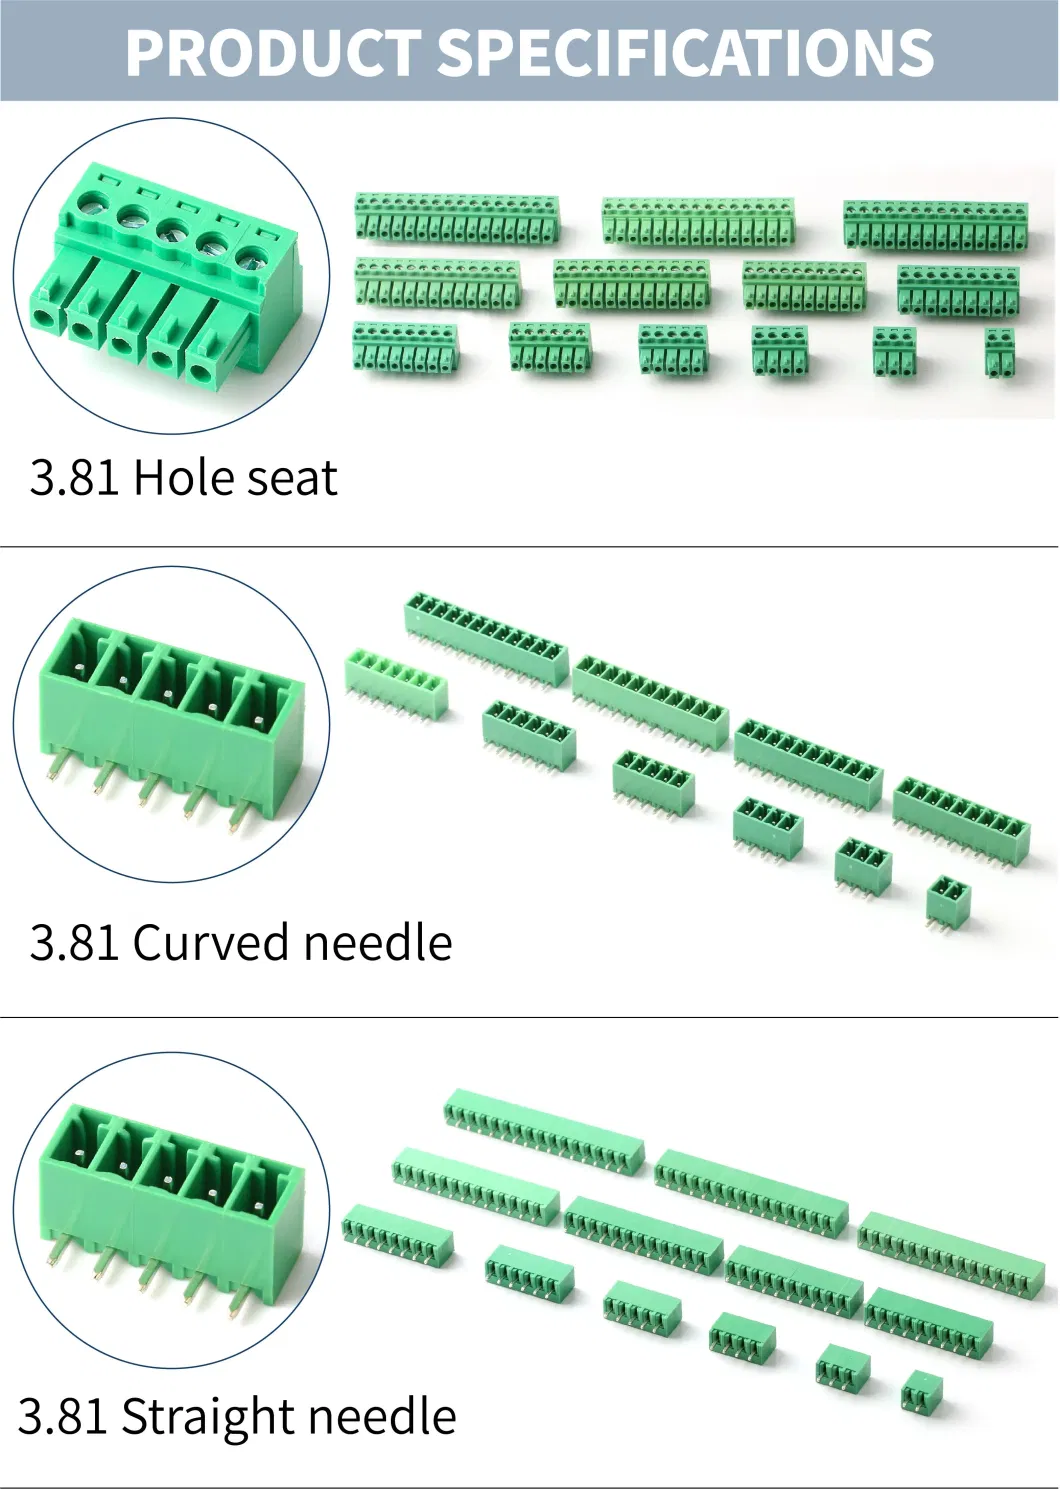 Spring Pluggable 2/3/4/5/6/7/8/9/10 Pin 3.81mm 5.0mm 5.08mm Pitch PCB Screw Terminal Block Connector Terminal Block